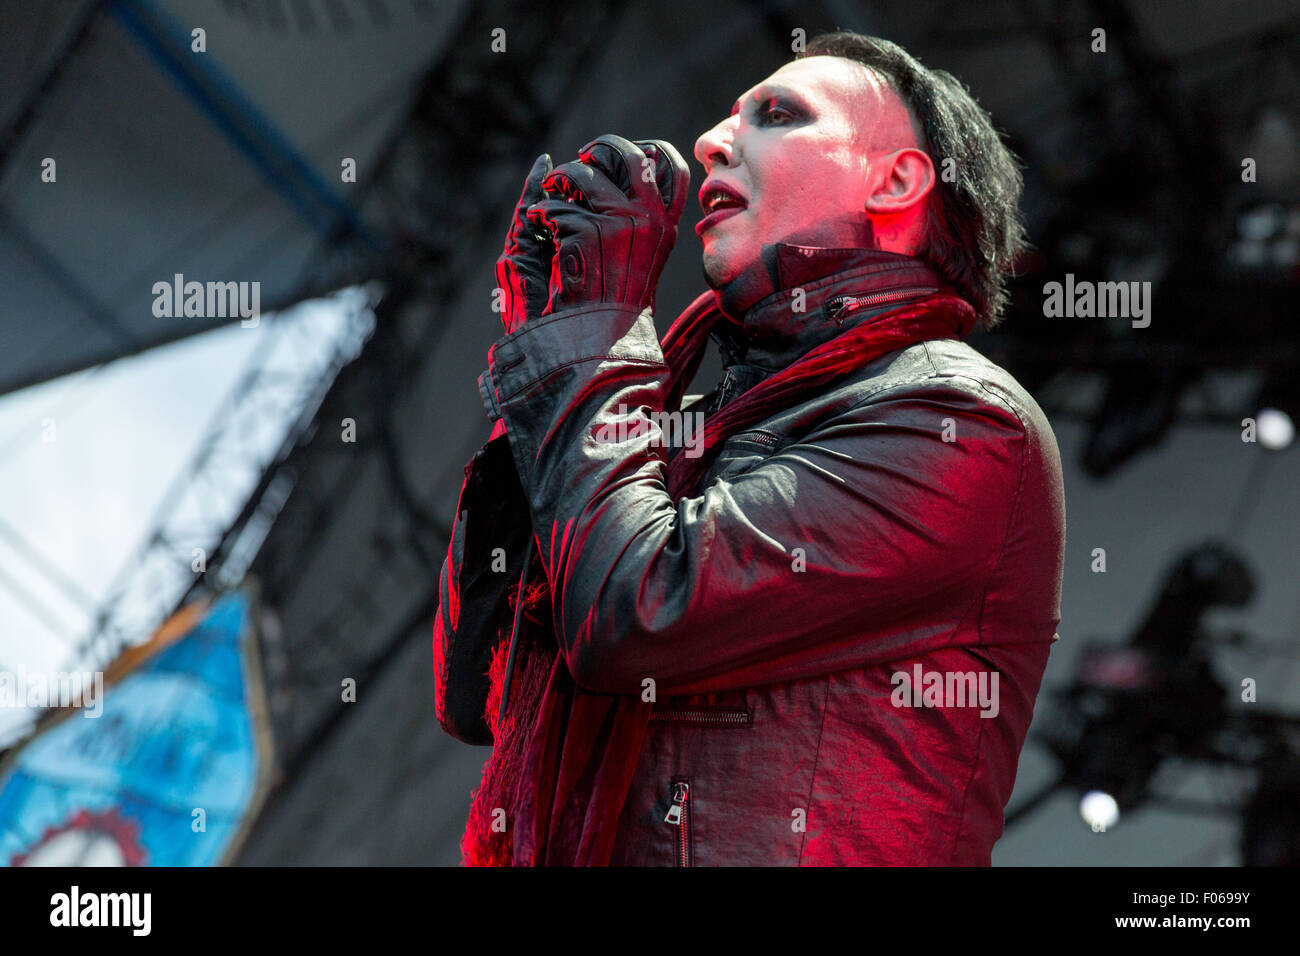 Chicago, Illinois, USA. 7th Aug, 2015. Singer MARILYN MANSON of Marilyn Manson performs live at the FirstMerit Bank Pavilion on Northerly Island in Chicago, Illinois © Daniel DeSlover/ZUMA Wire/Alamy Live News Stock Photo